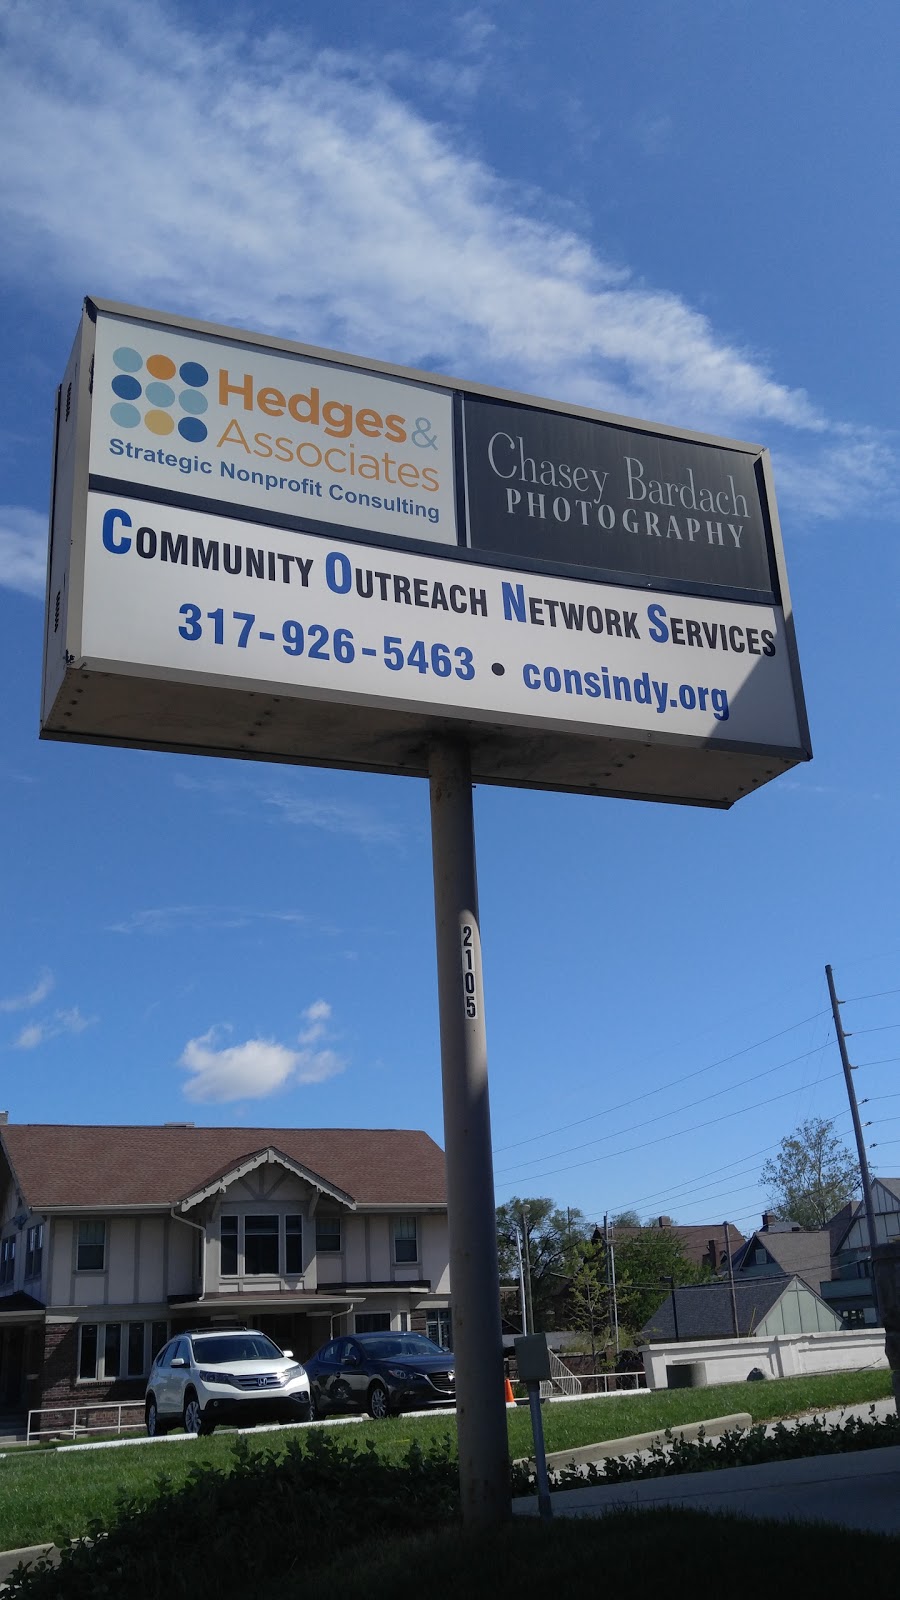 Community Outreach Network Services